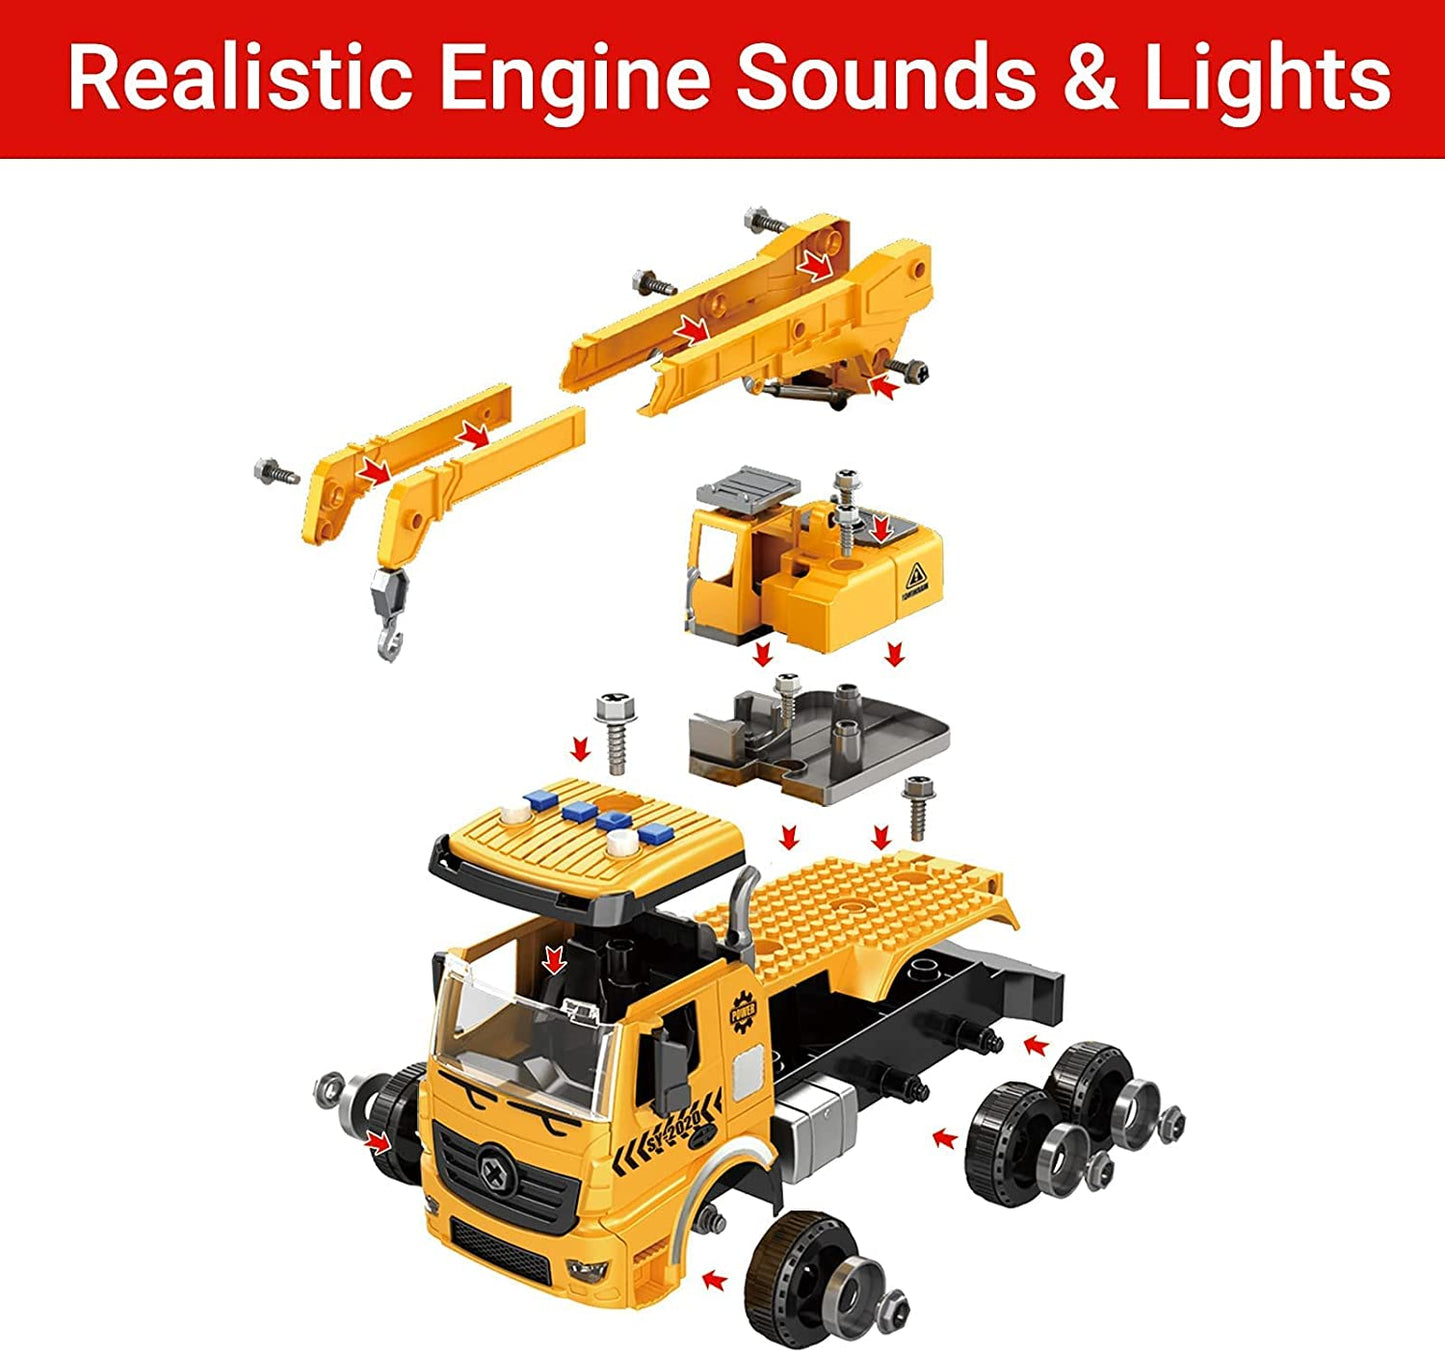 Take Apart Construction Toys for 4 5 6 7 8 Year Old Boy, 1 Truck and 3 Backs Assemble to Mixer, Excavator & Crane, 3 in 1 DIY Kids Stem Toy Truck with Sound and Light for Christmas & Birthday